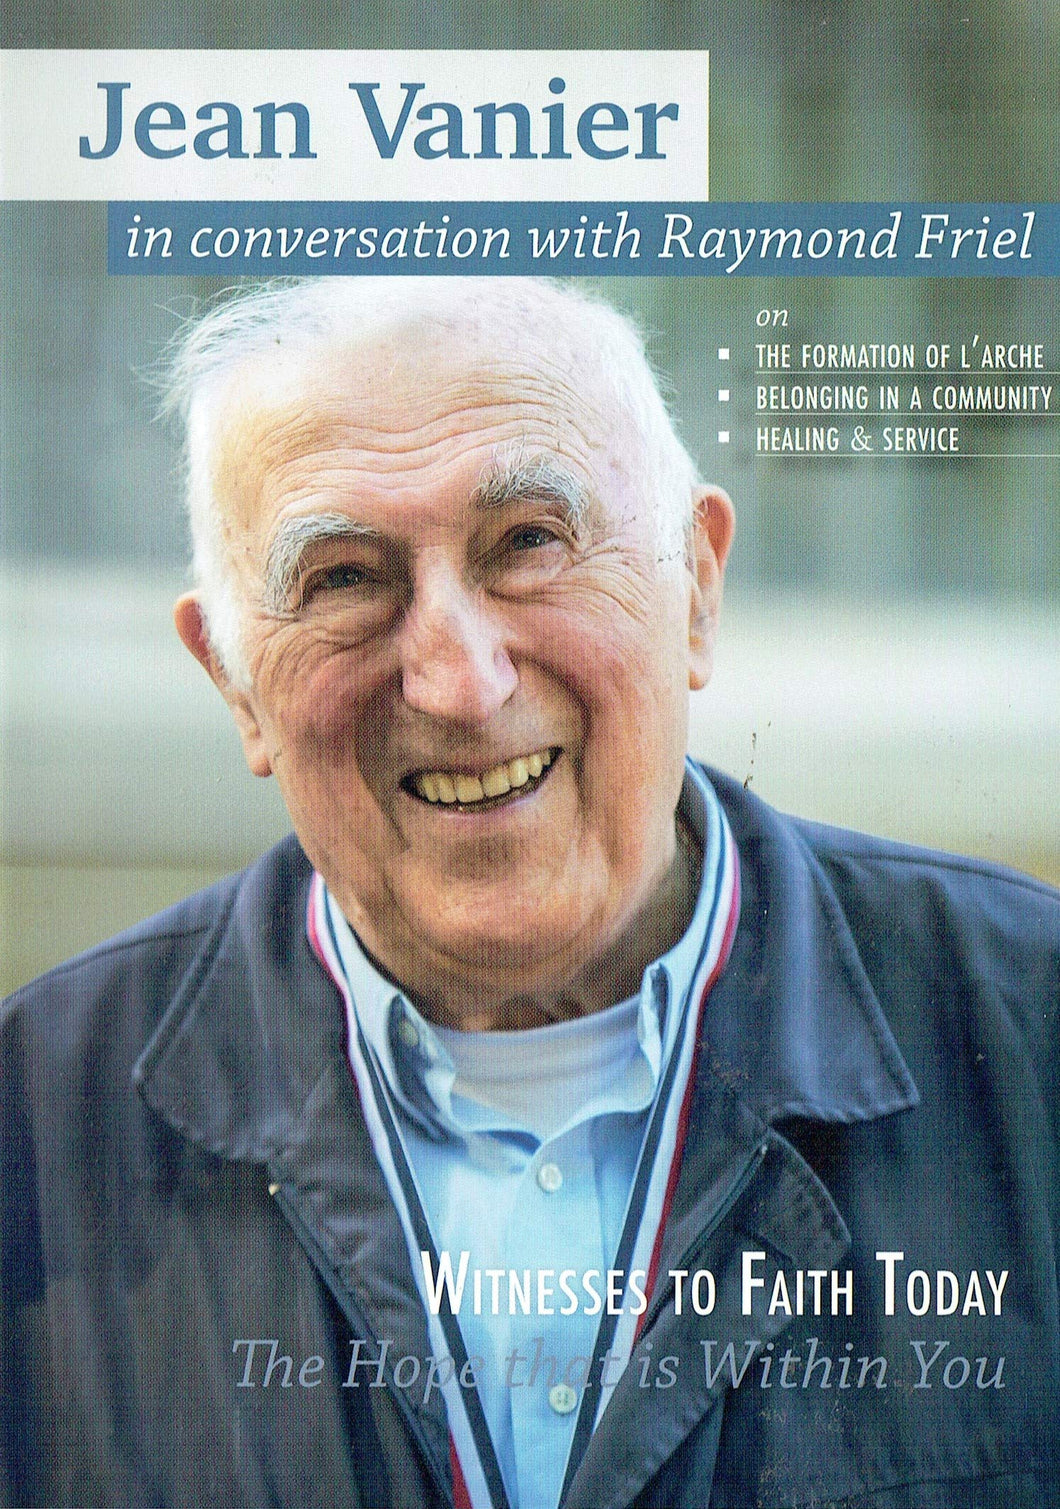 Jean Vanier in conversation with Raymond Friel on The Formation of l'Arche, Belonging in a Community, Healing and Service. Witnesses to Faith Today - The Hope that is Within You